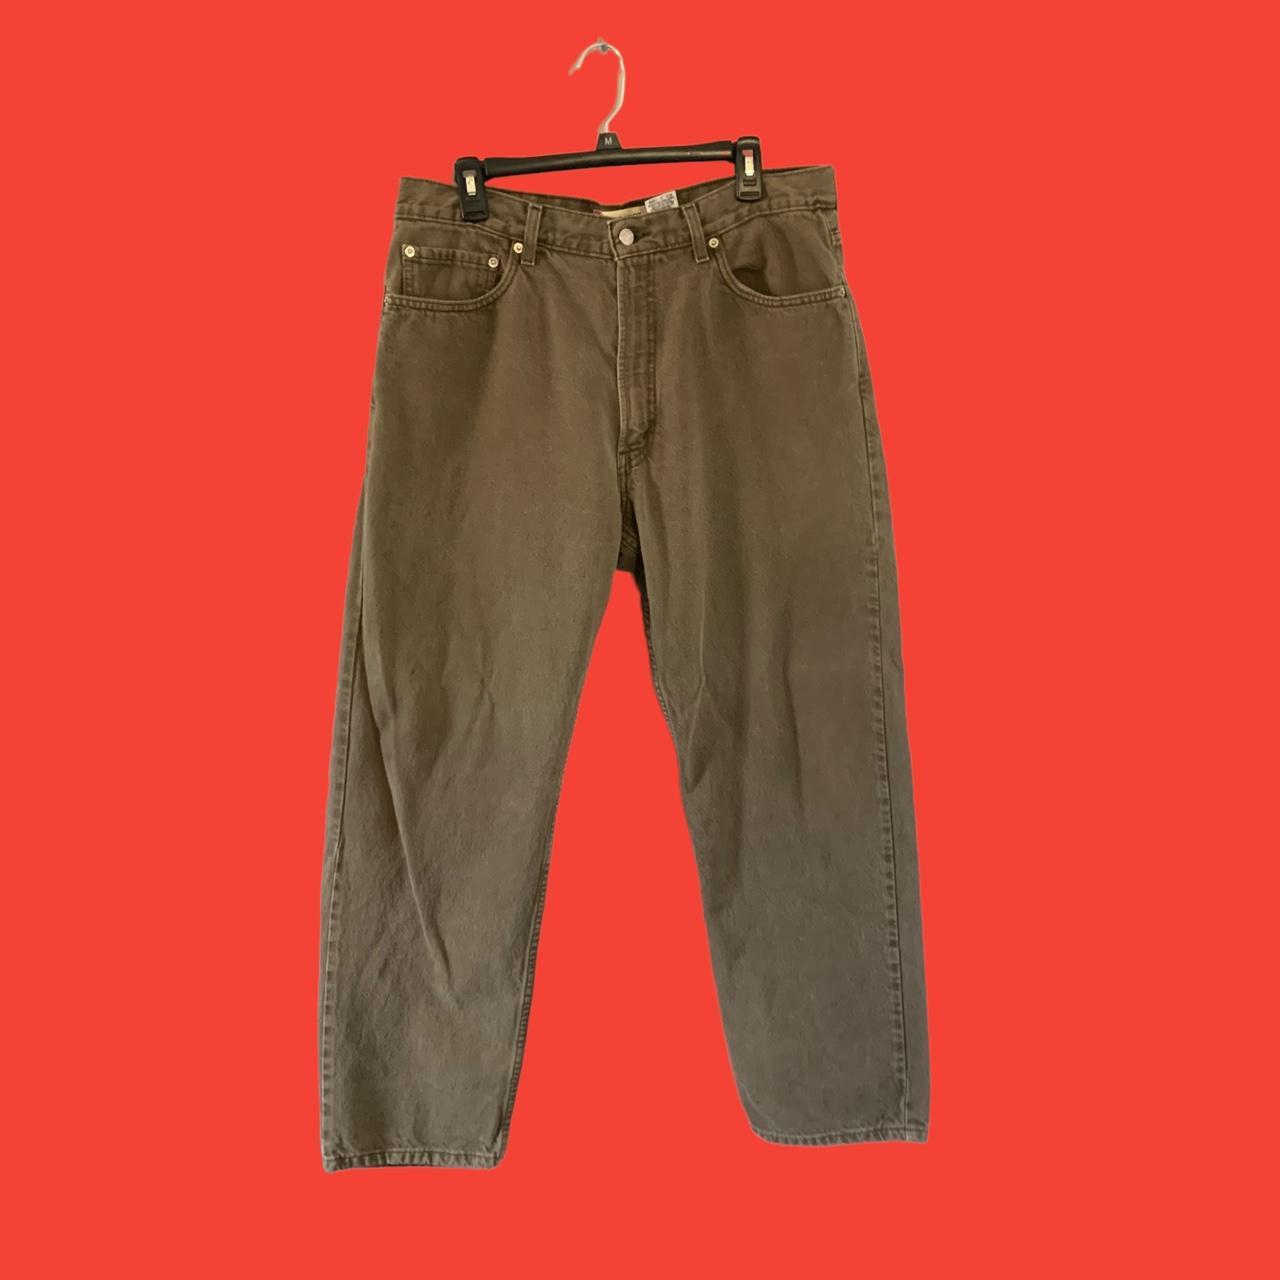 Product Image 1 - Perfect Faded Baggy Levi 550